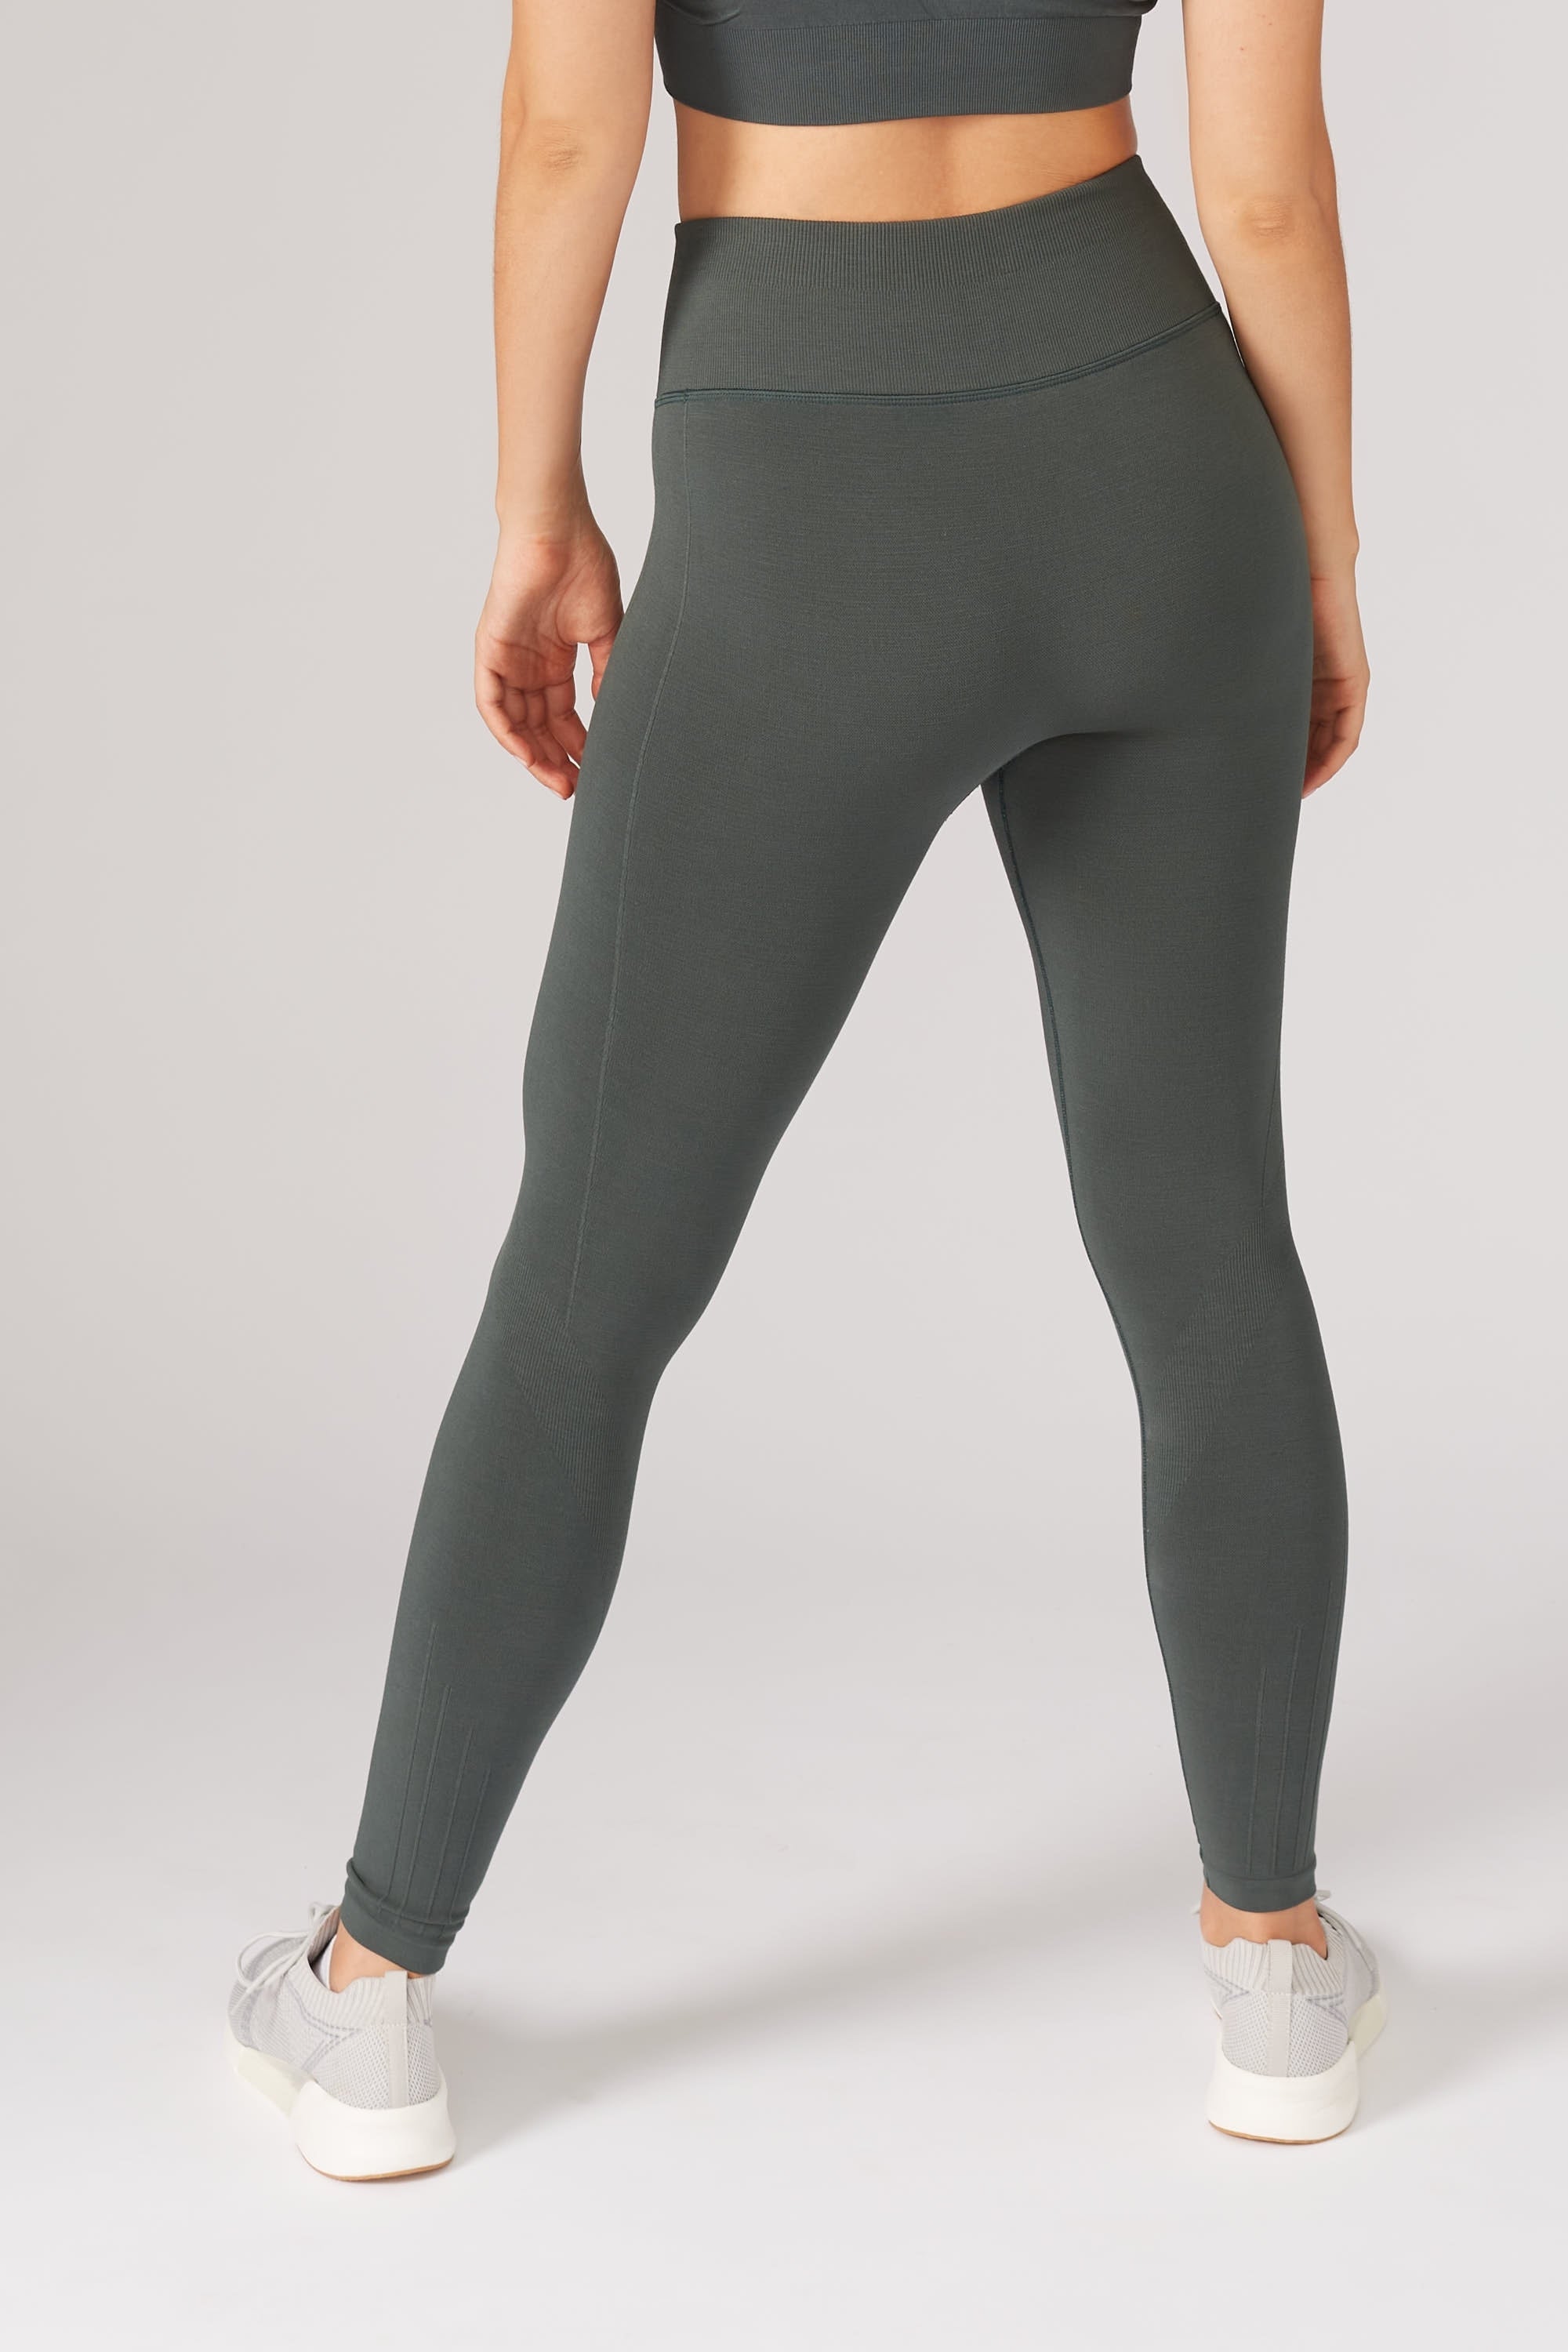 Model wearing green leggings and supportive sports bra for sustainable activewear brand, Jilla.